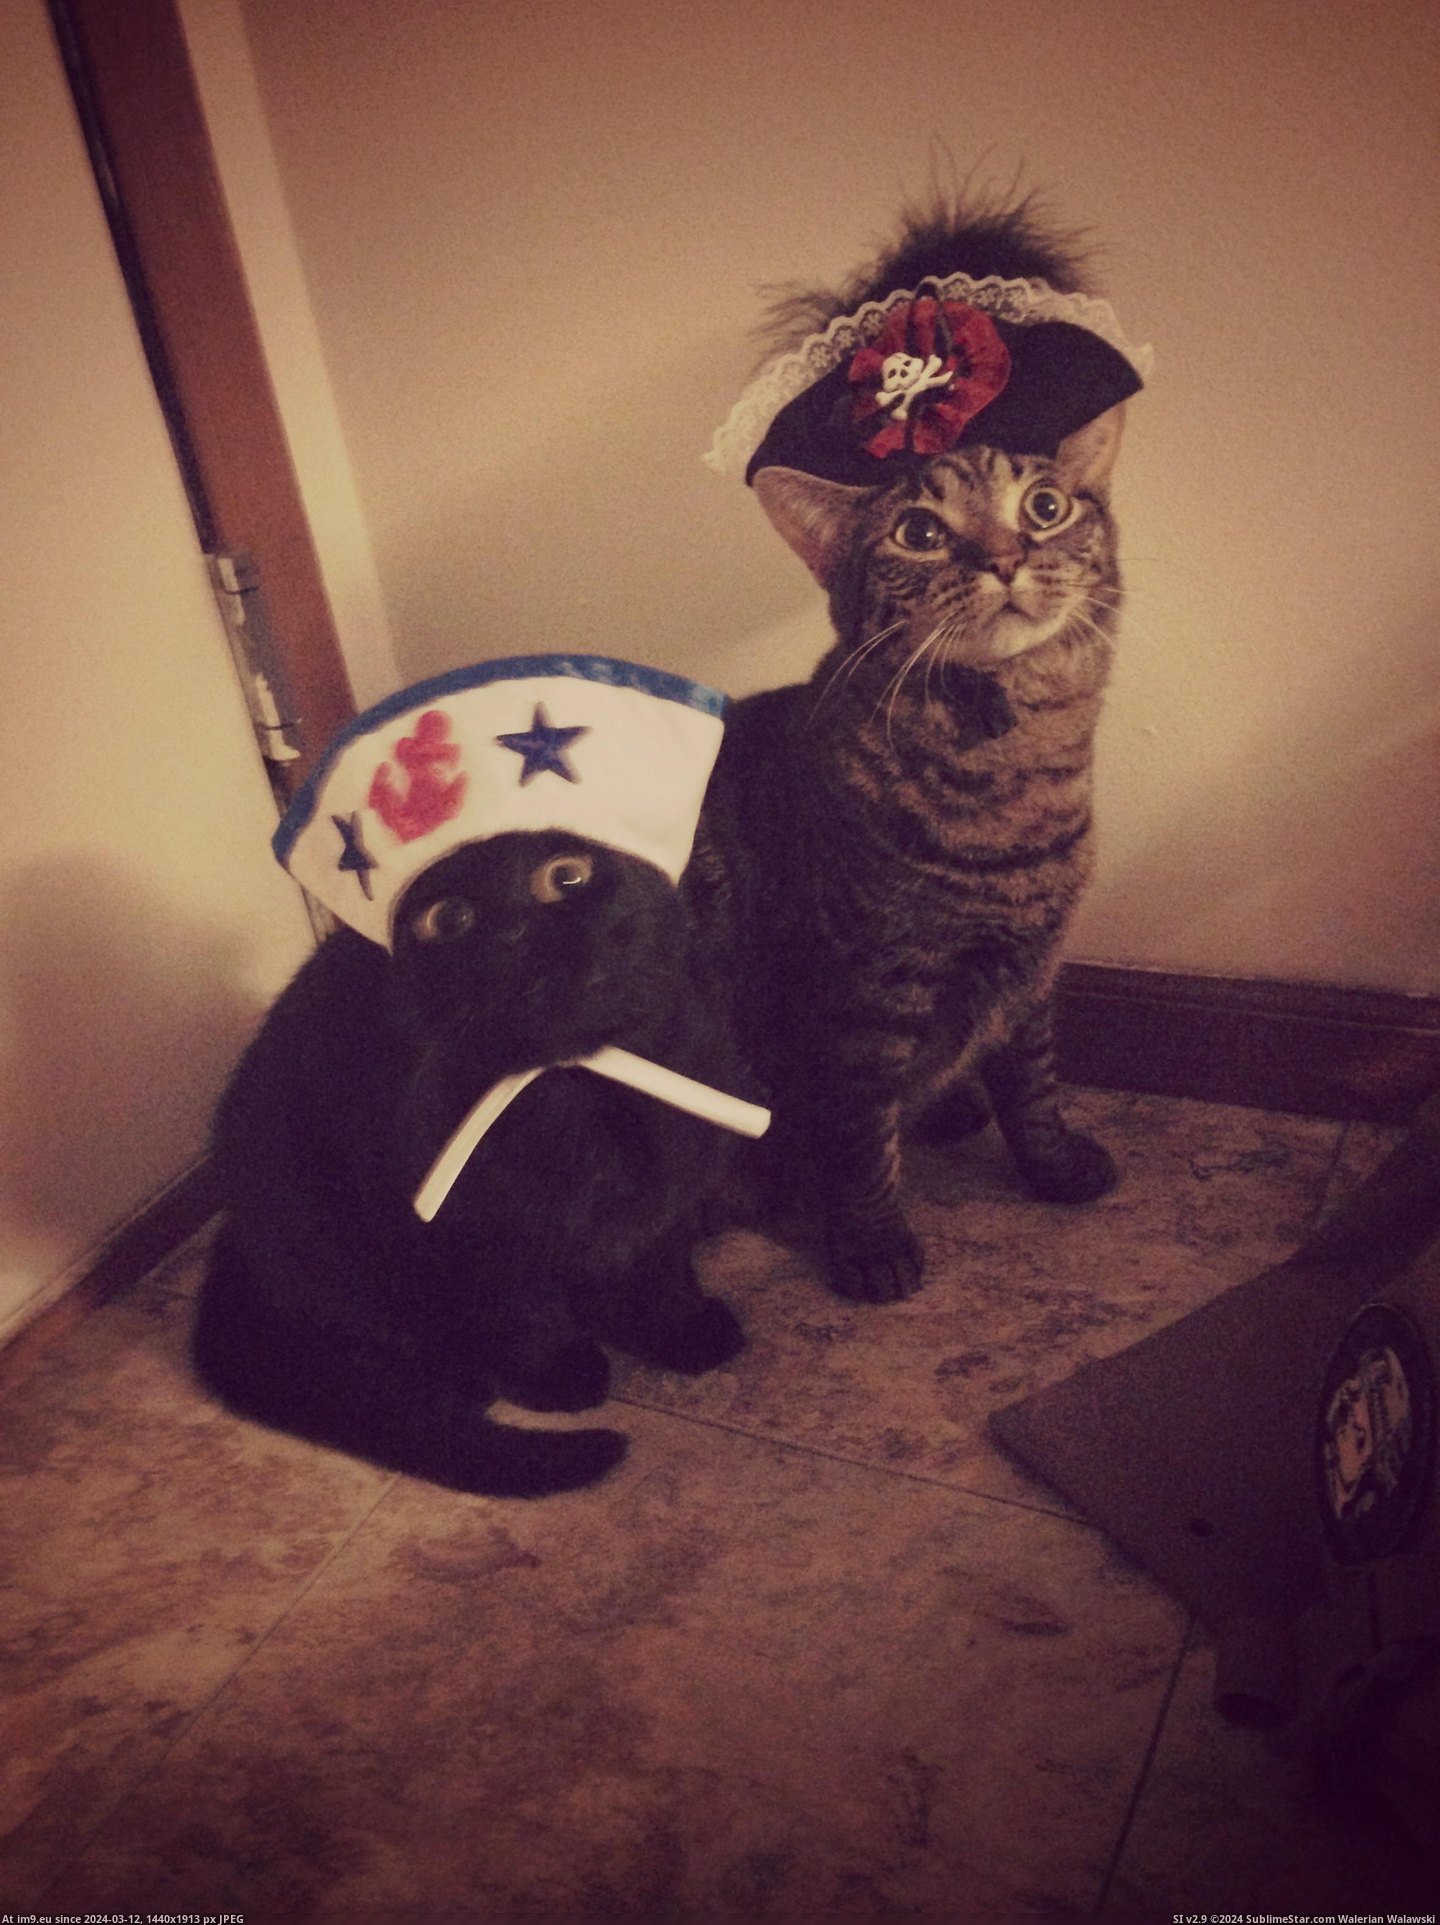 #Cats #High #Ready #Bento #Seas #Salty #Wench #Sea #Captain #Lunchbox [Cats] Captain Bento and his salty sea wench Lunchbox are ready to take on the high seas. Pic. (Image of album My r/CATS favs))